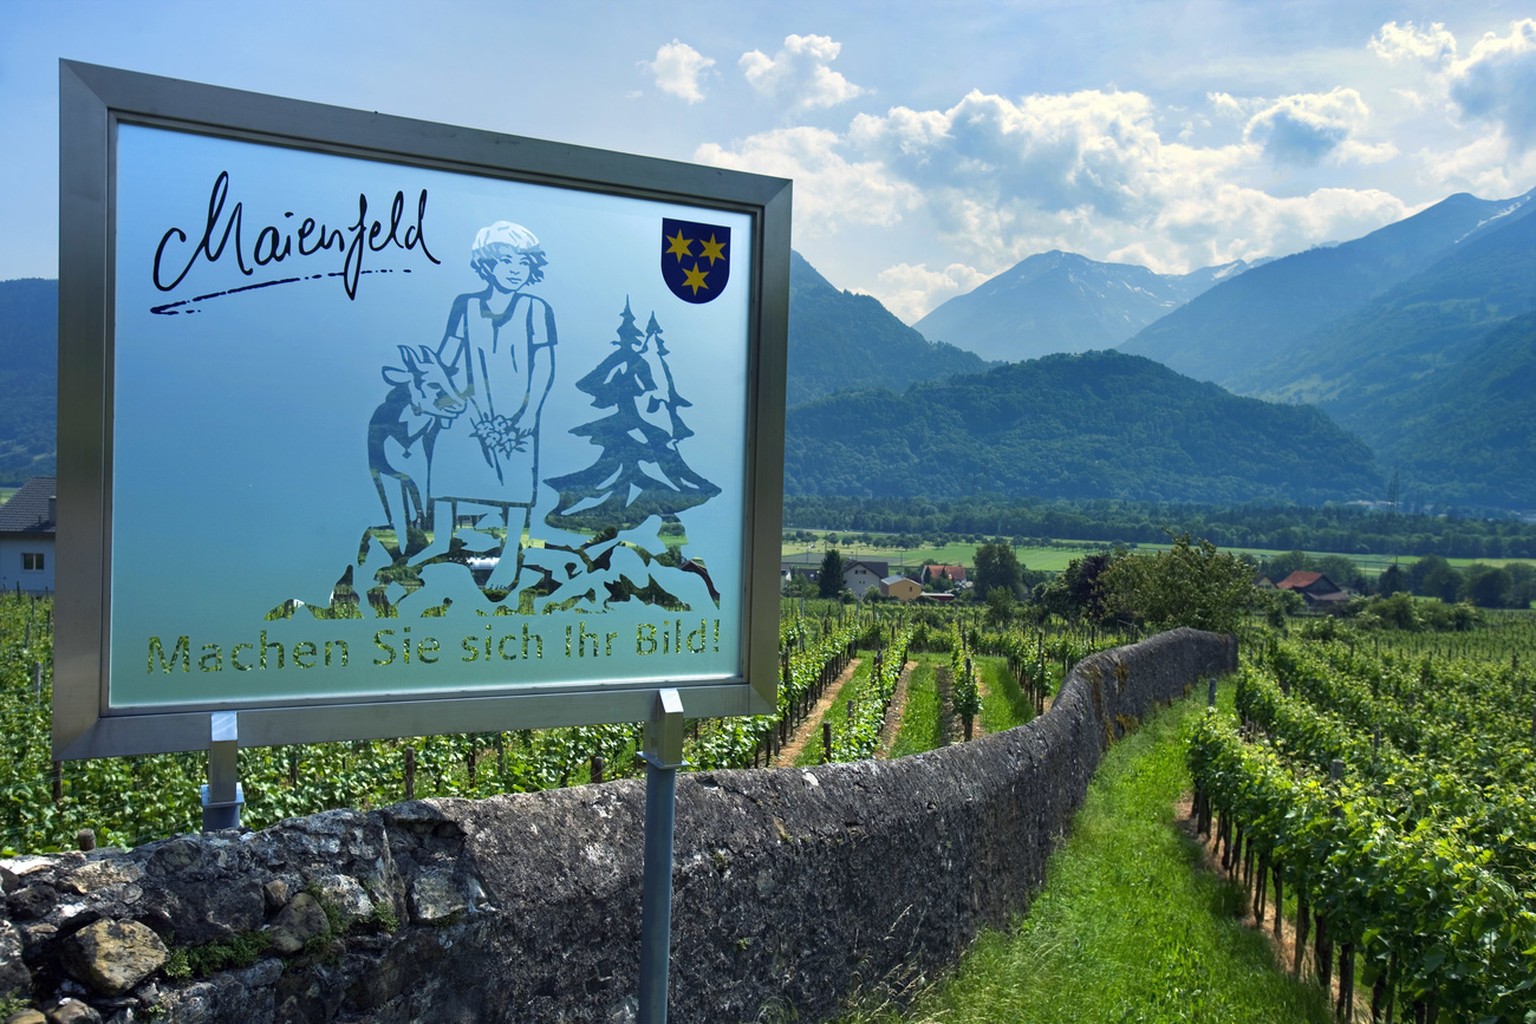 A sign in Maienfeld, Switzerland, refers to the world-famous Heidi story by Johanna Spyri that is set in this region in the Grisons, pictured on May 30, 2005. In Heididorf above Maienfeld, visitors fr ...